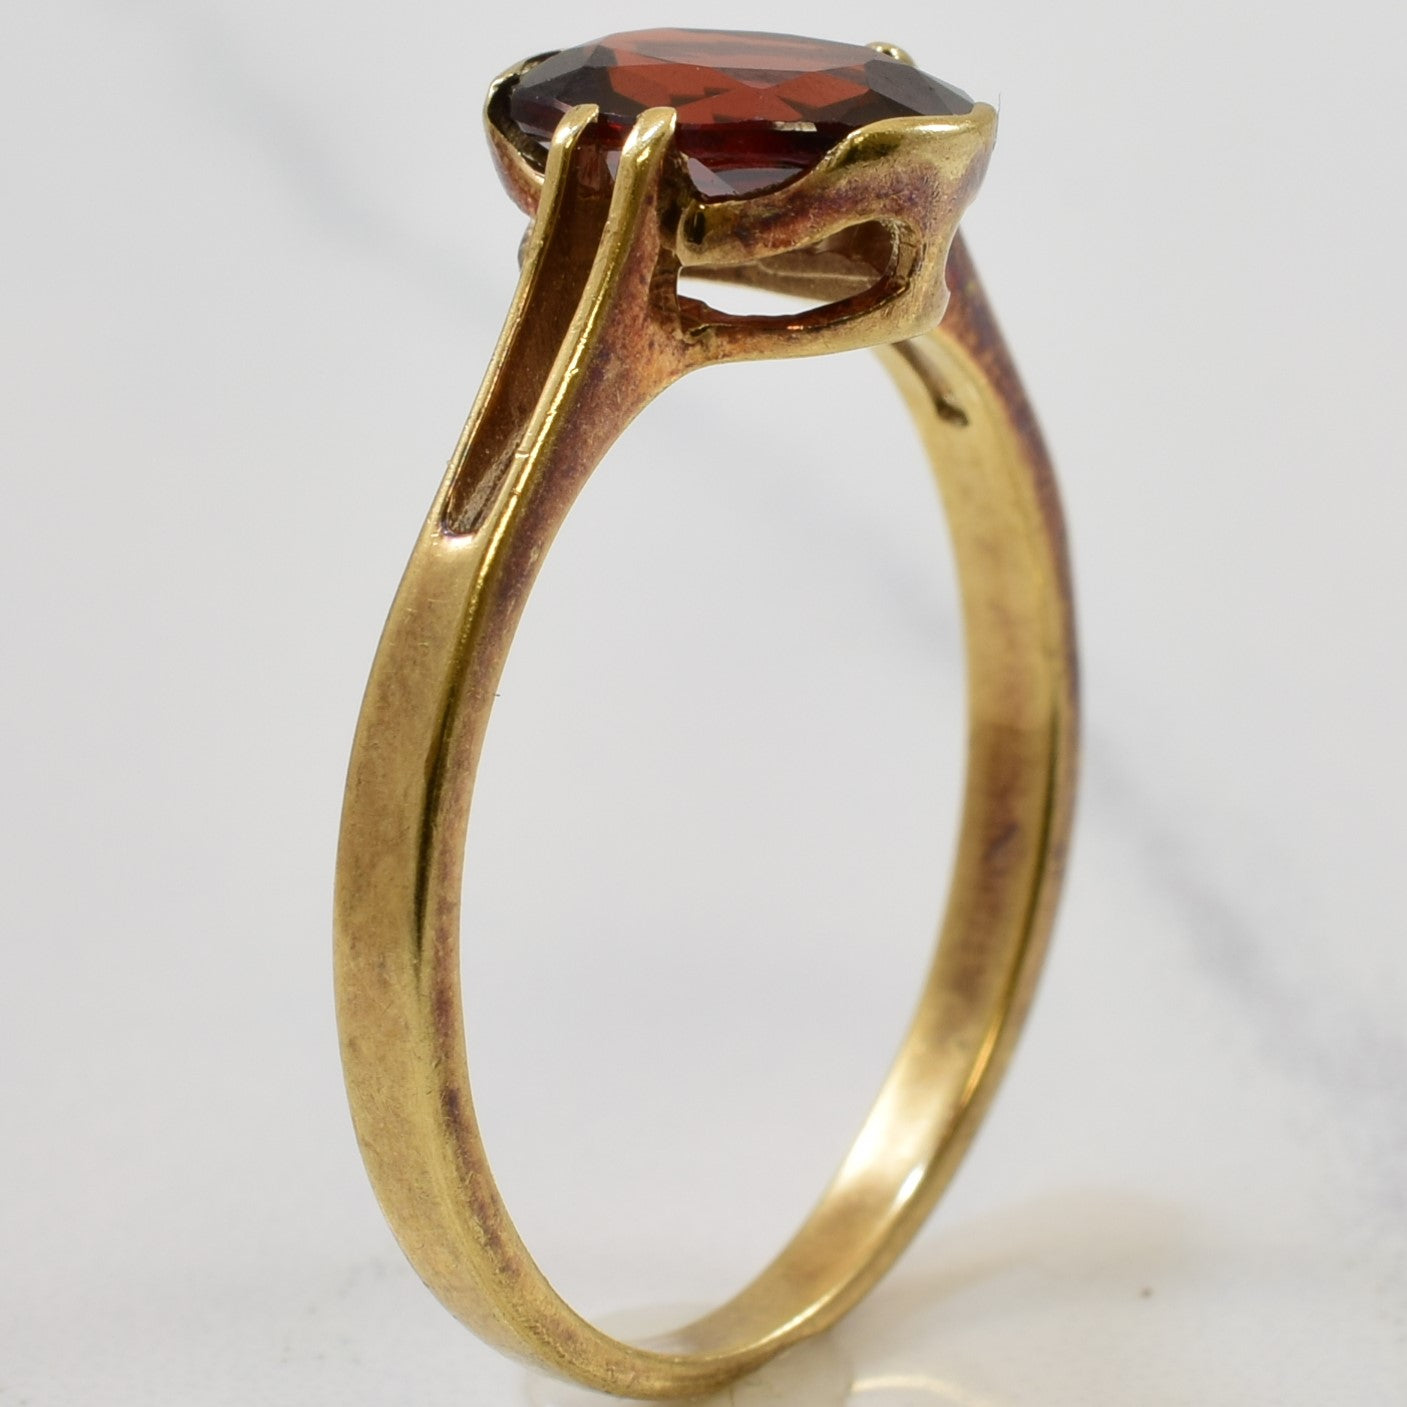 Oval Garnet Solitaire Ring | 1.60ct | SZ 6.75 |